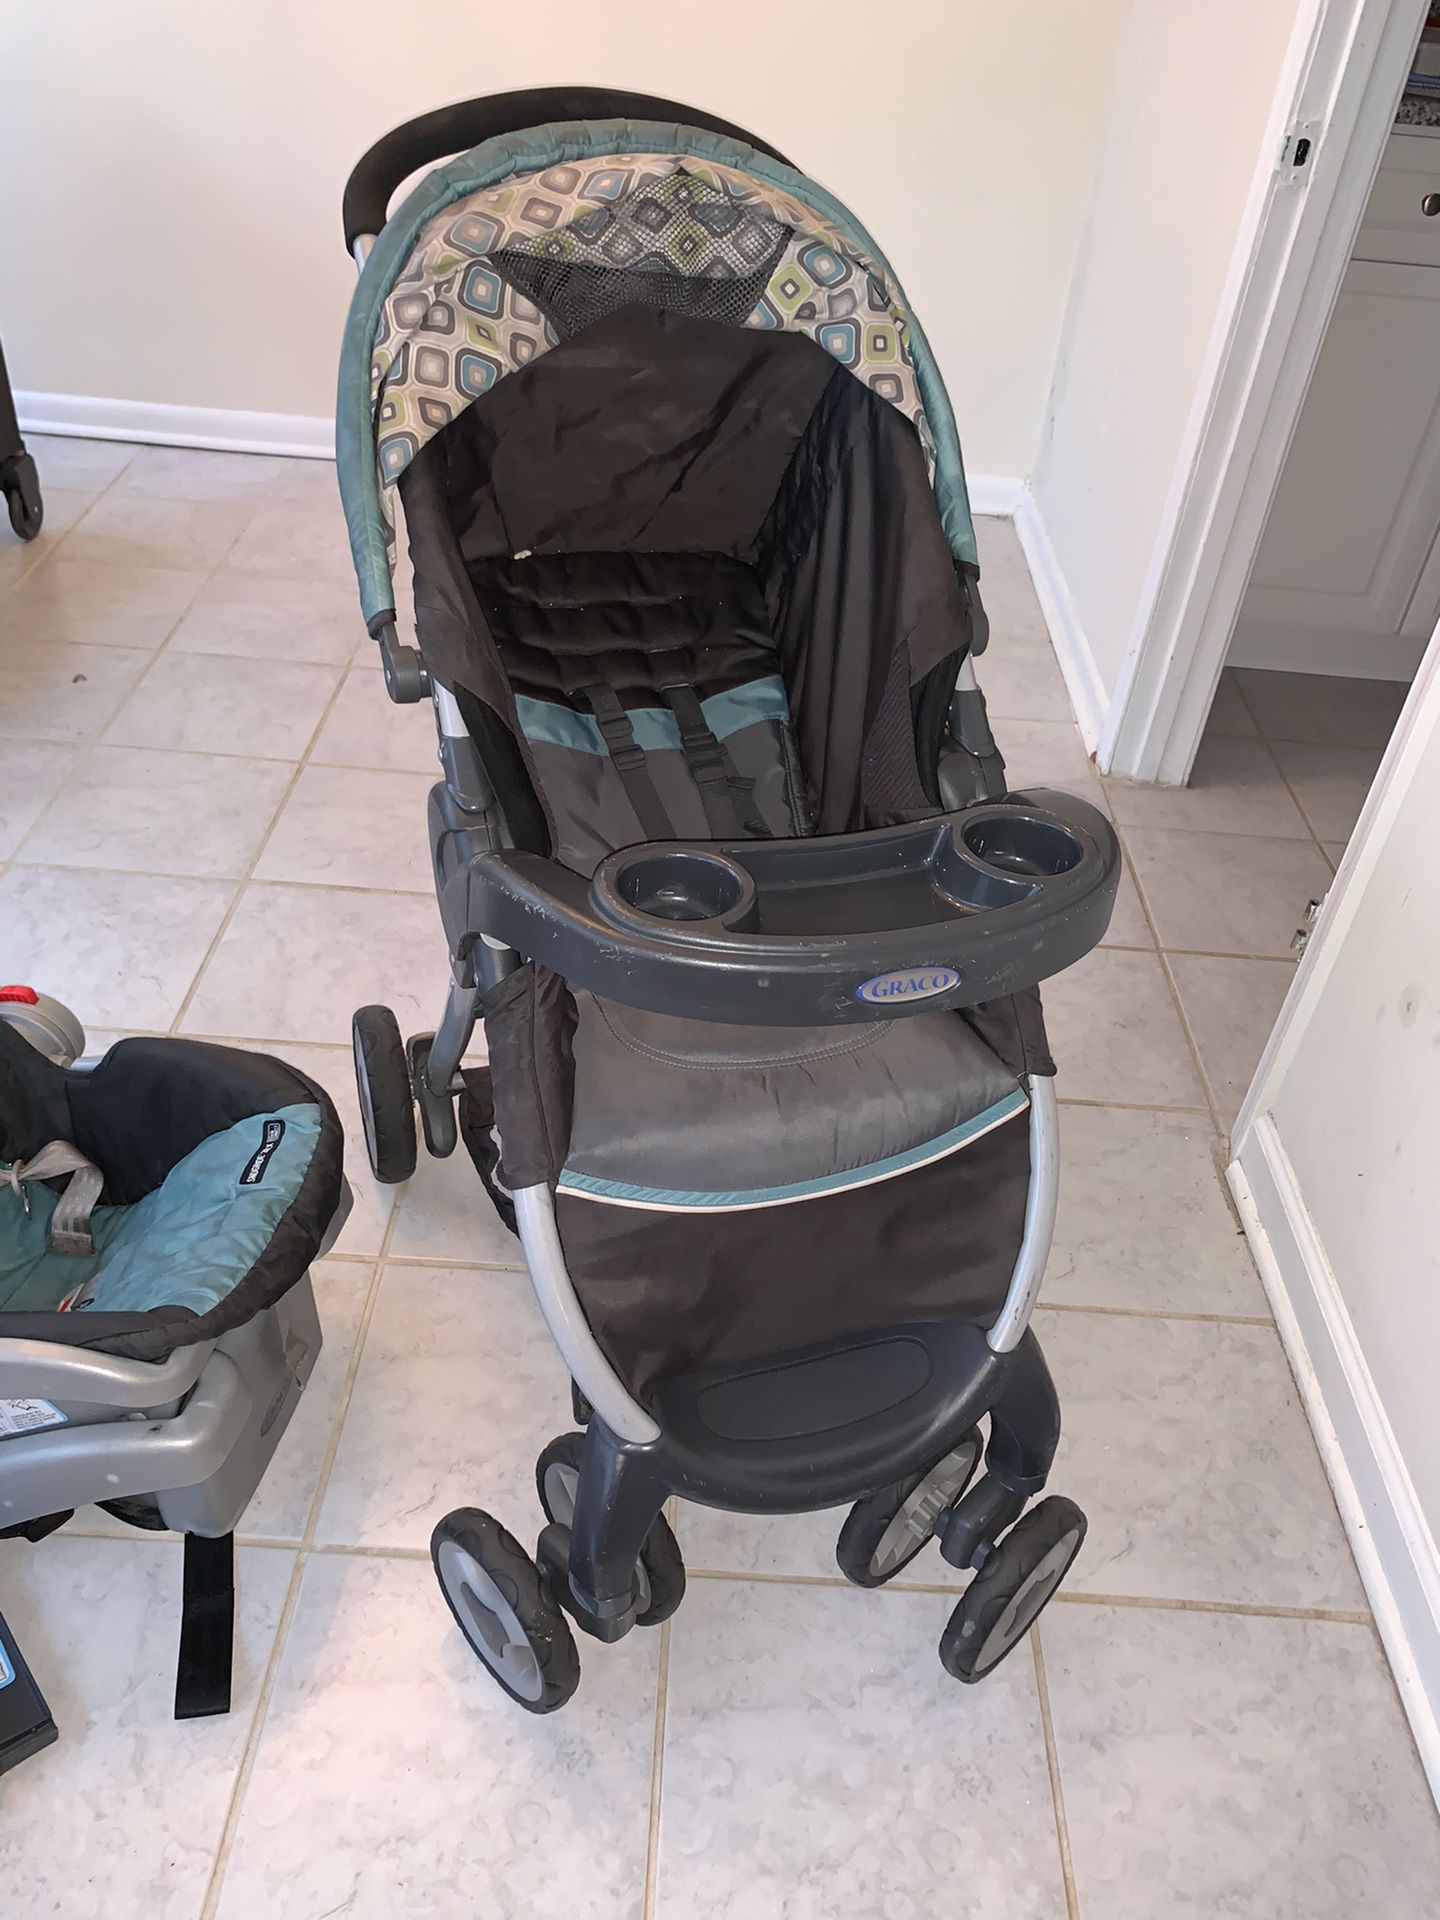 Graco Fastaction click connect stroller set